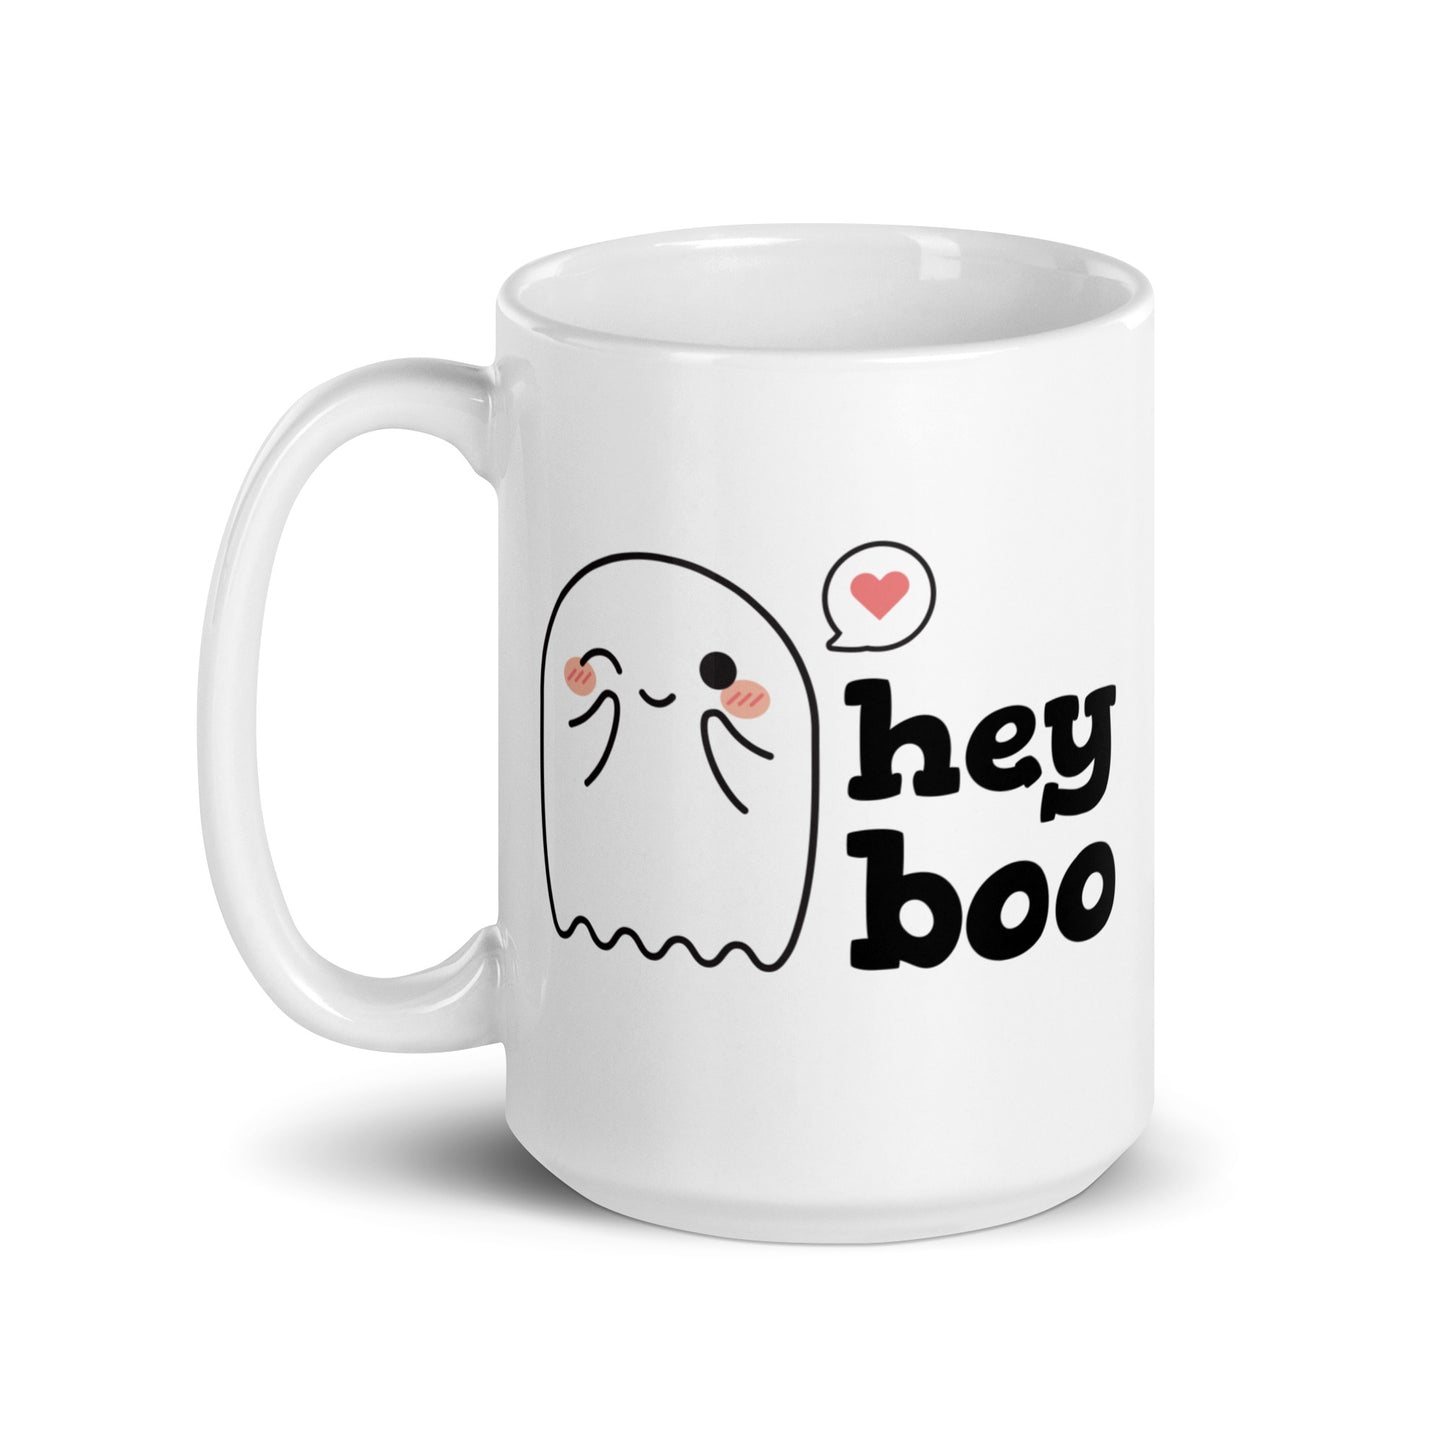 A white 15 ounce coffee mug featuring an illustration of a blushing and smiling ghost next to text that reads "hey boo"